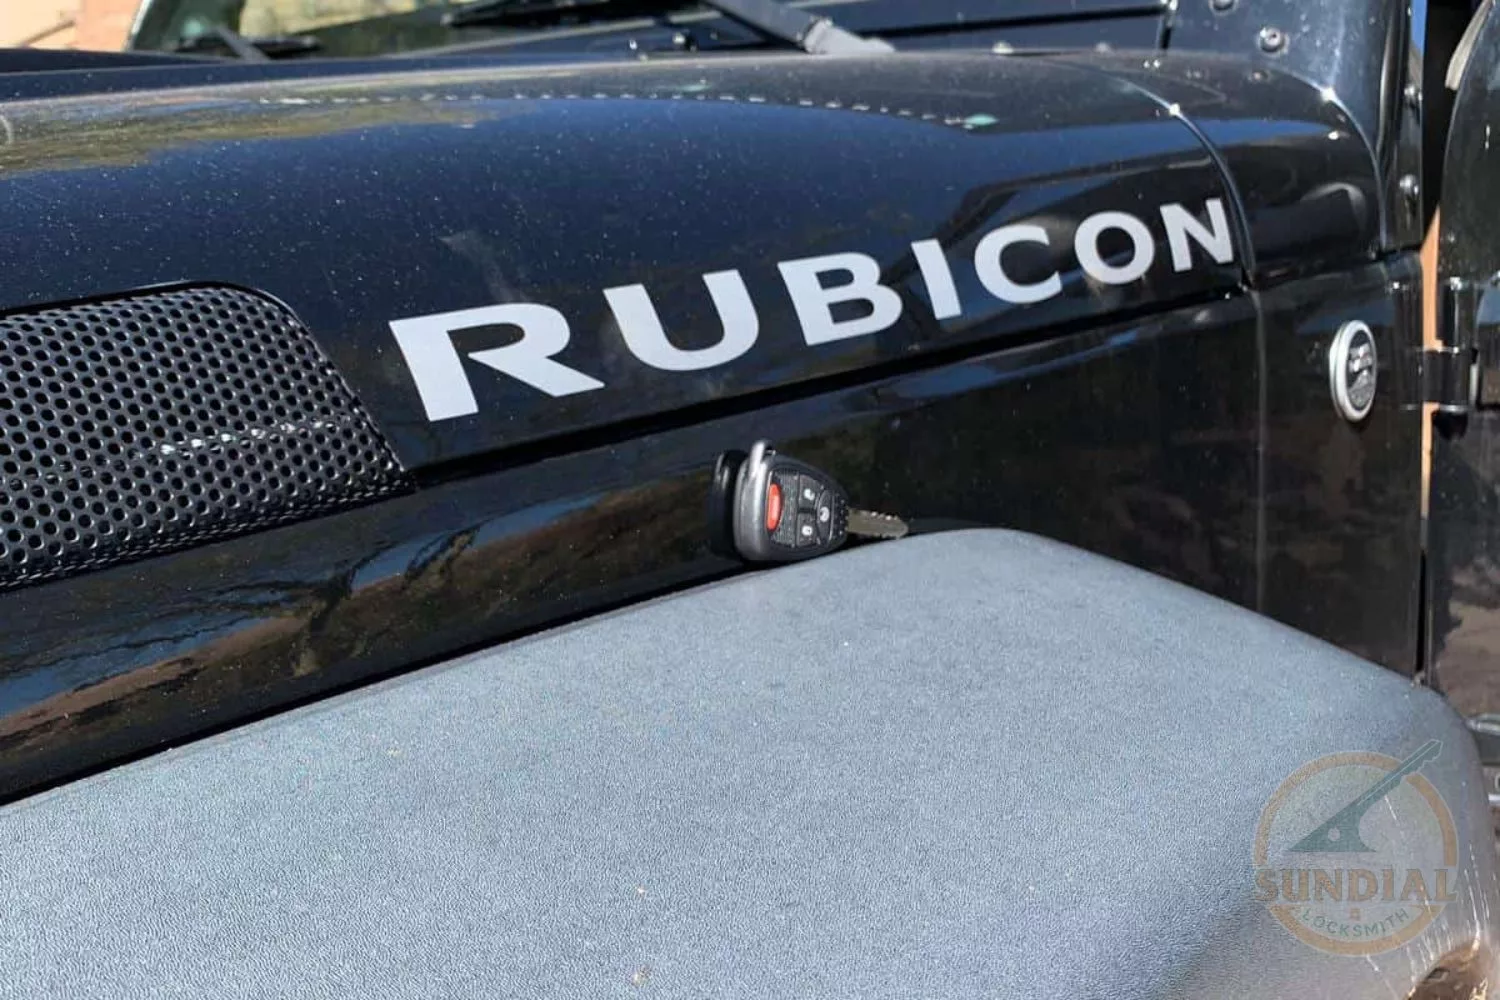 Rubicon car fender with key fob placed on top.